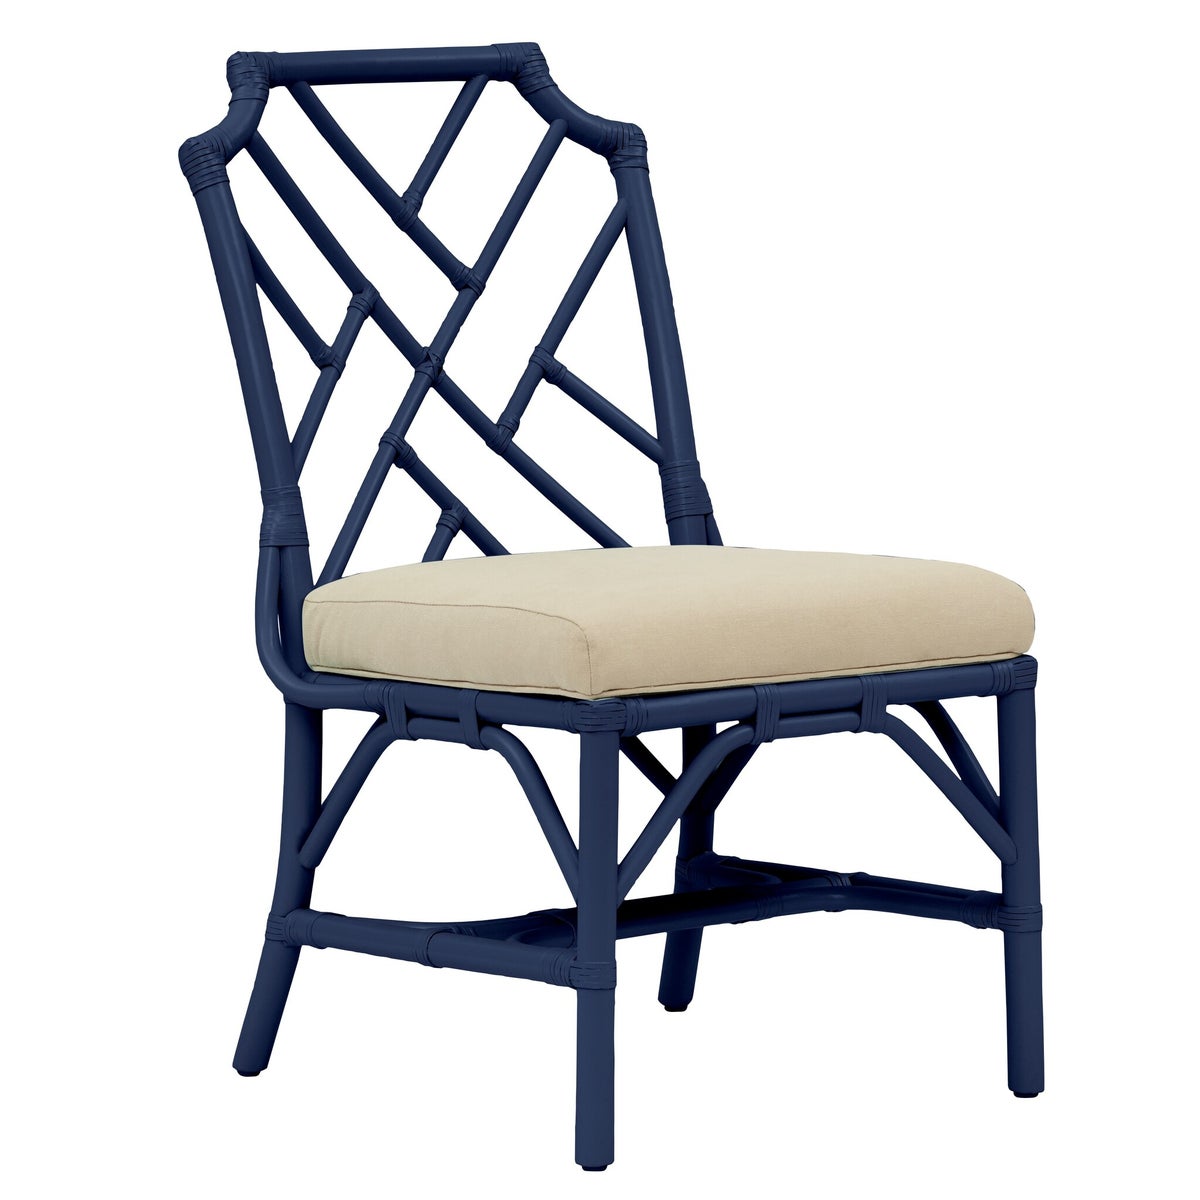 Palm Beach Chippendale Side Chair Unpainted - "Select Your Color" Cushion Color: Cream Rattan Fram